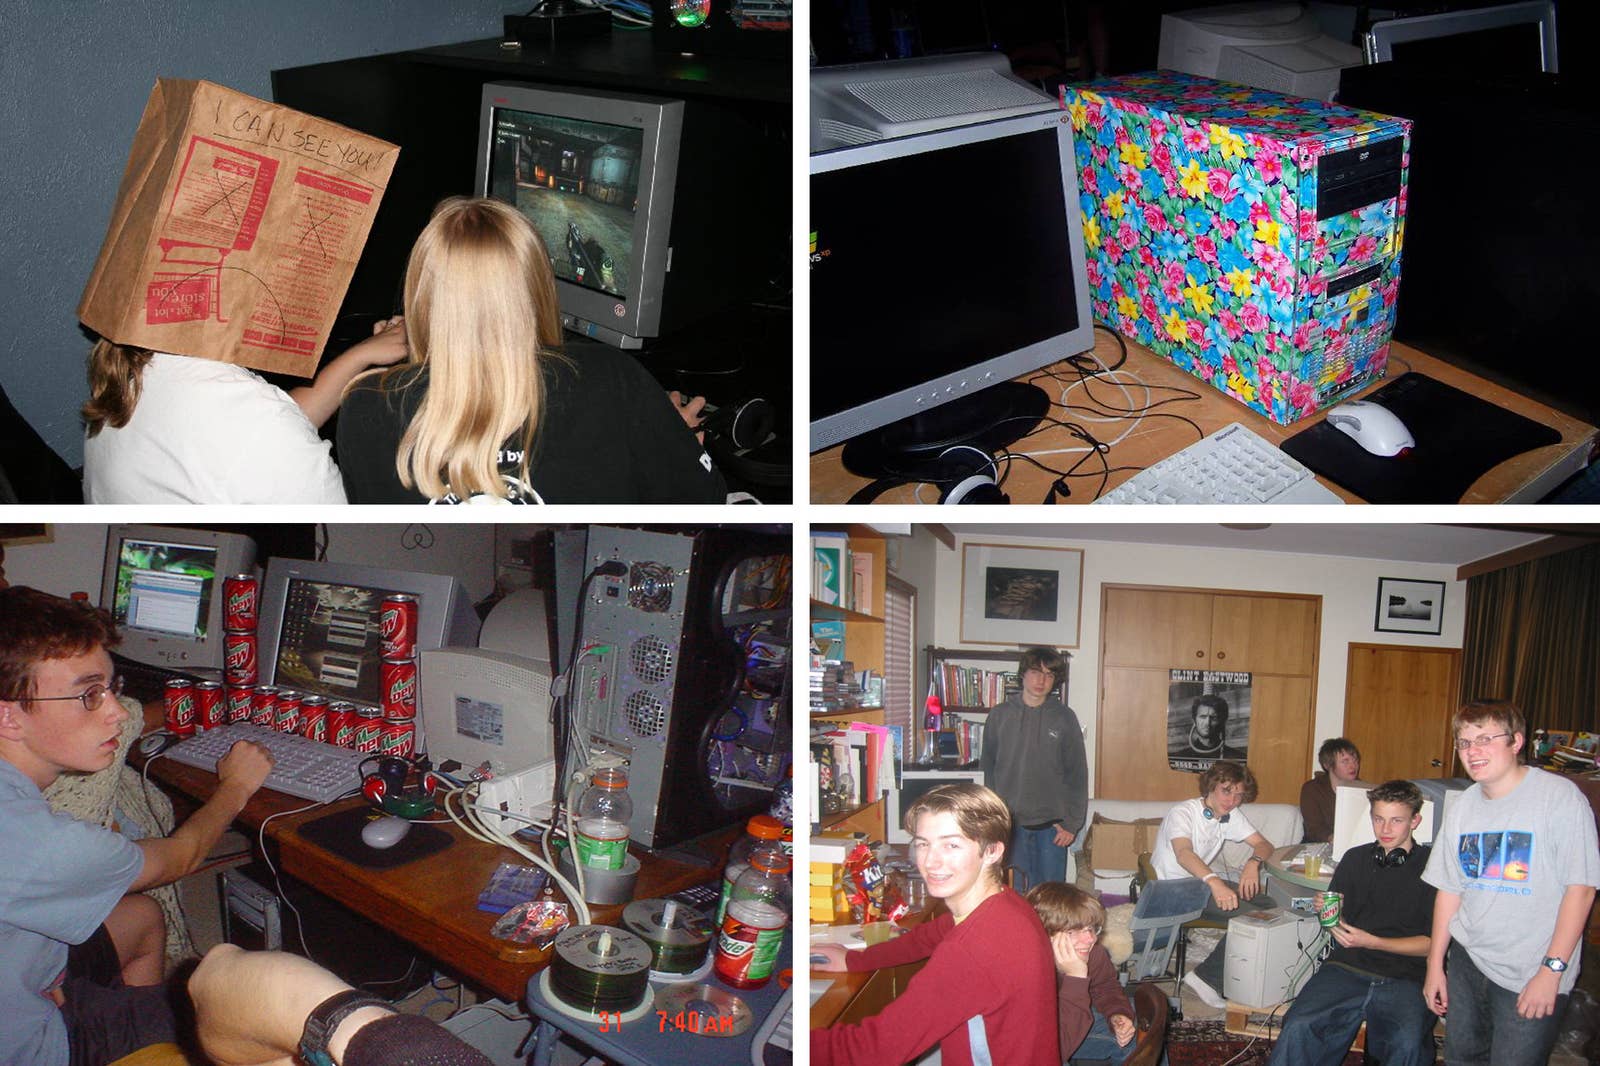 Four images of people at LAN parties